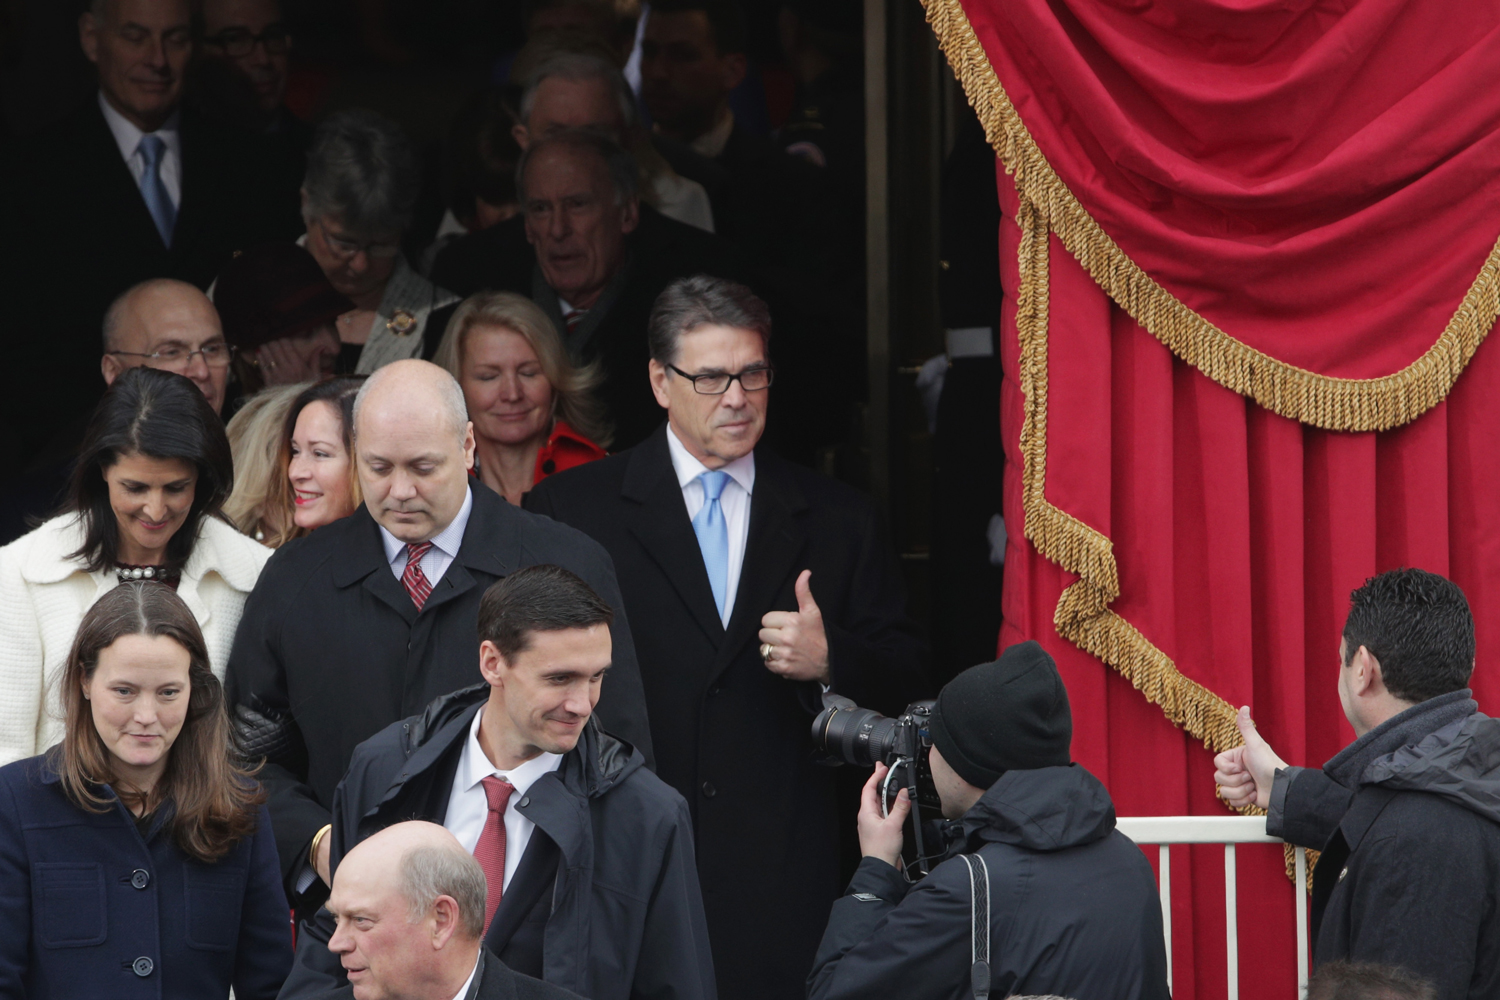 Rick Perry, Trump's pick to head the Department of Energy, was all thumbs at the inauguration last week.